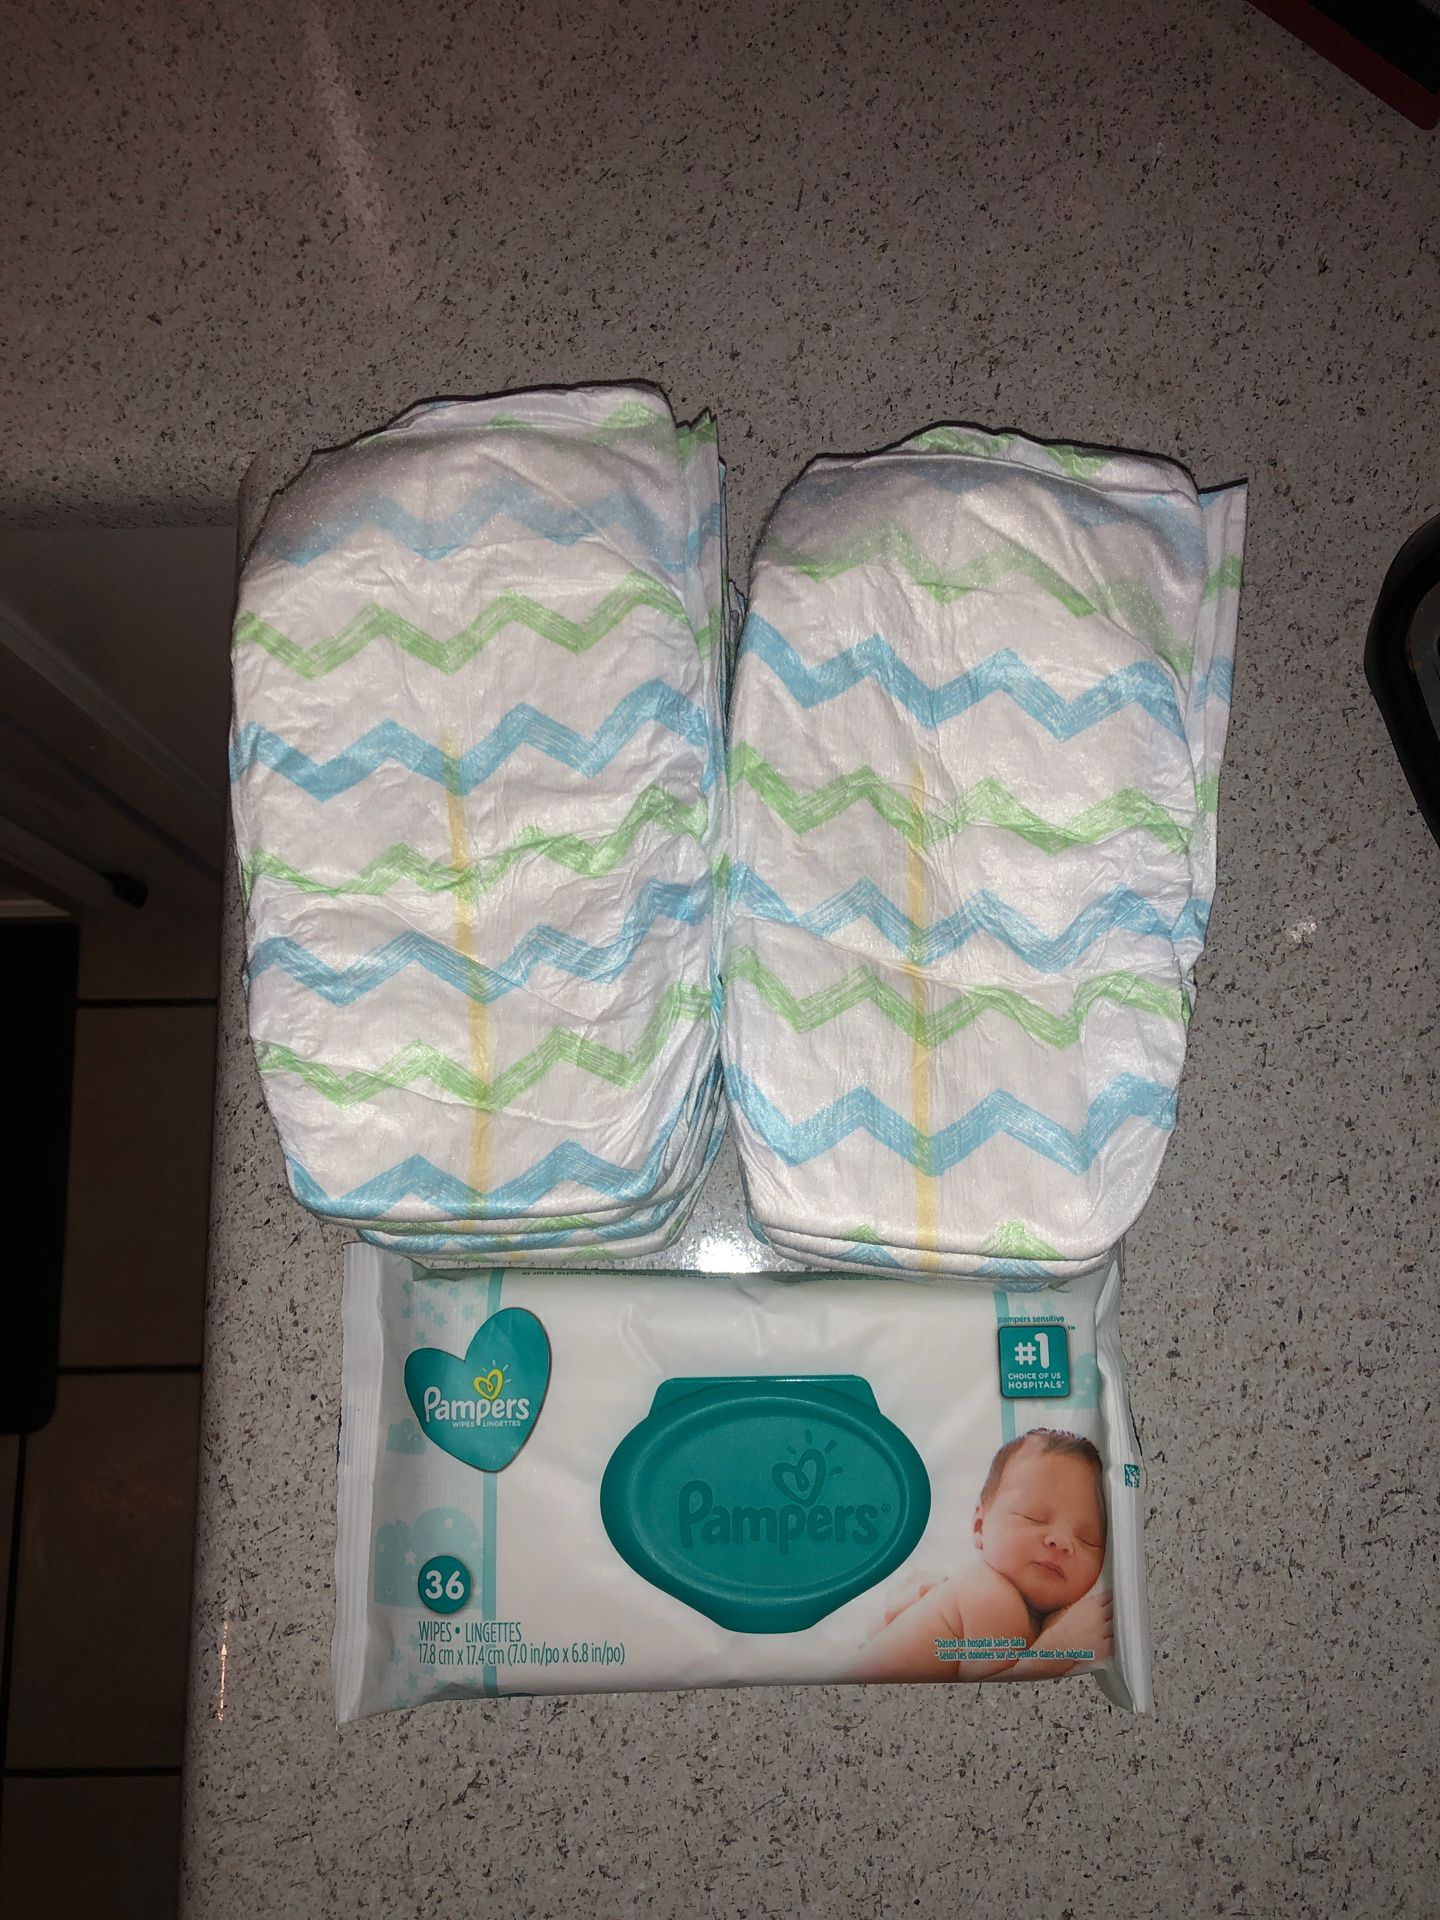 Diapers & wipes